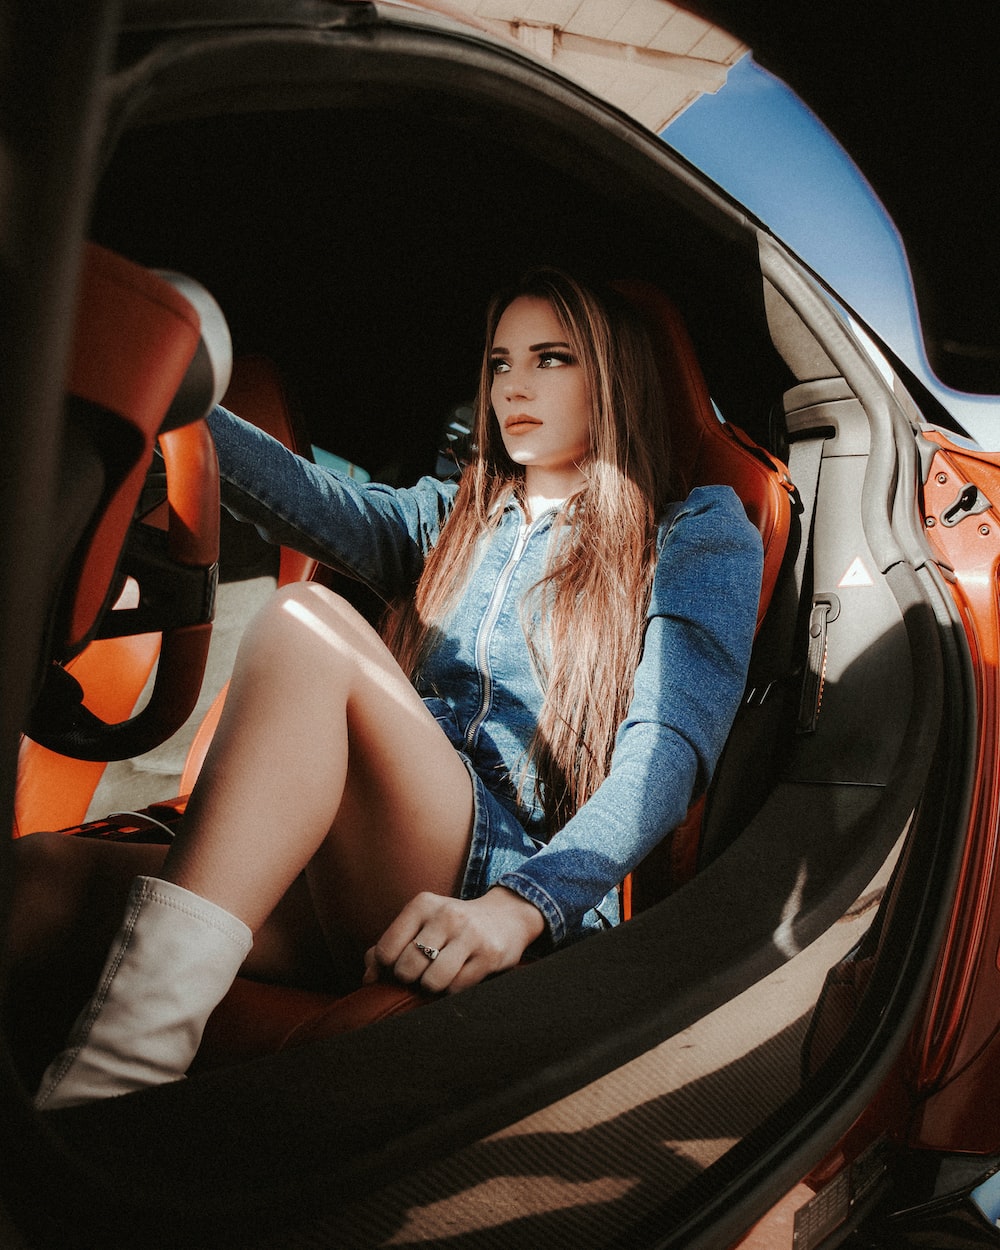 Car And Girl Wallpapers